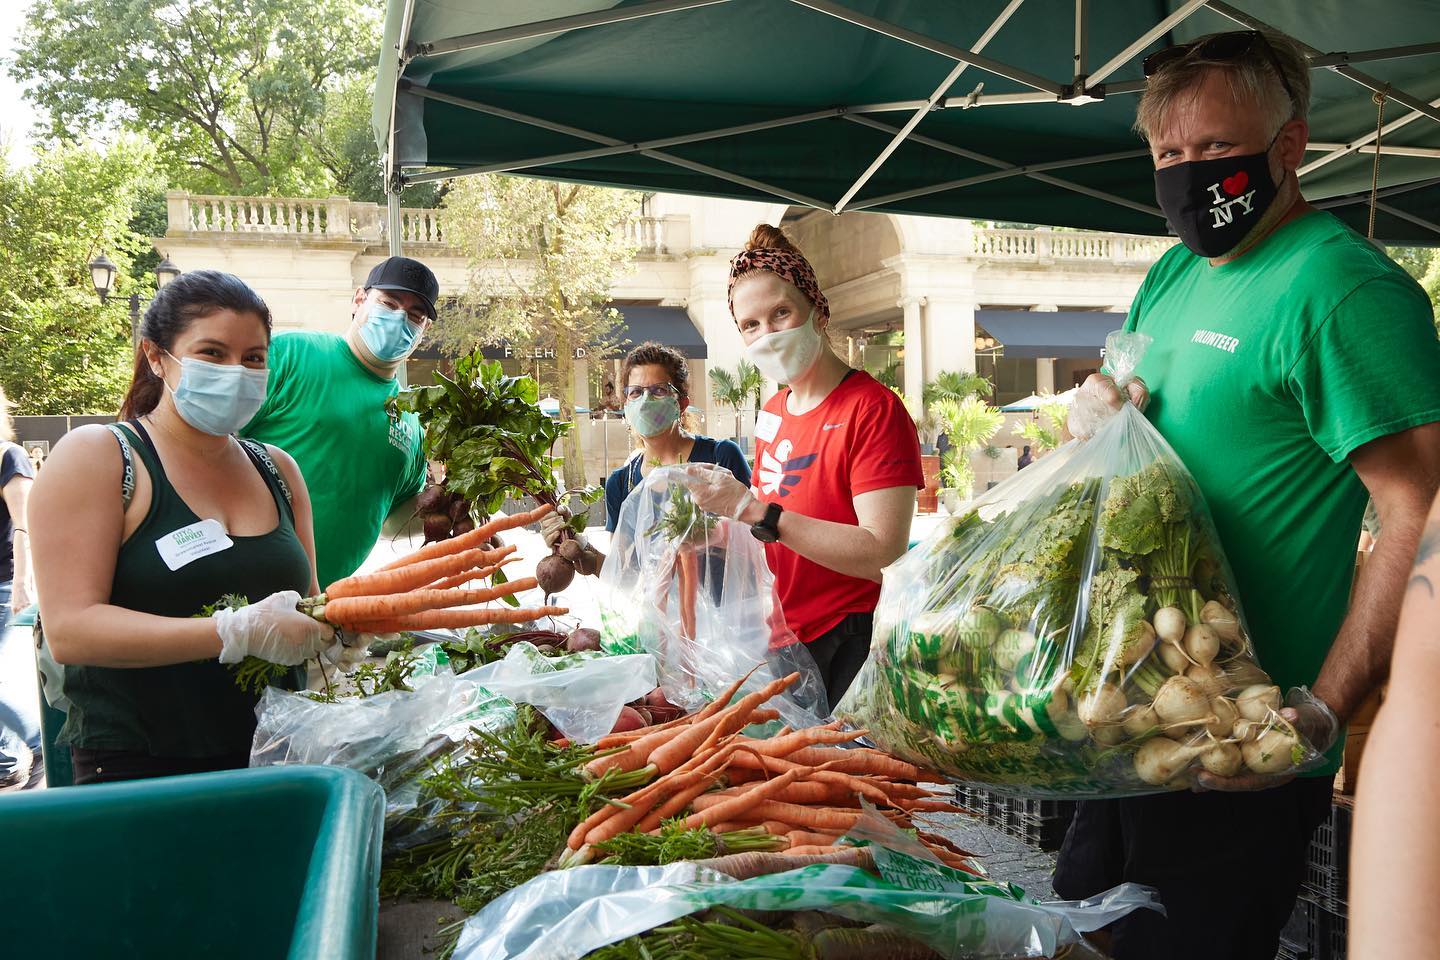 PHOTO: Volunteers with fresh produce at Union Square Greenmarket for City Harvest.